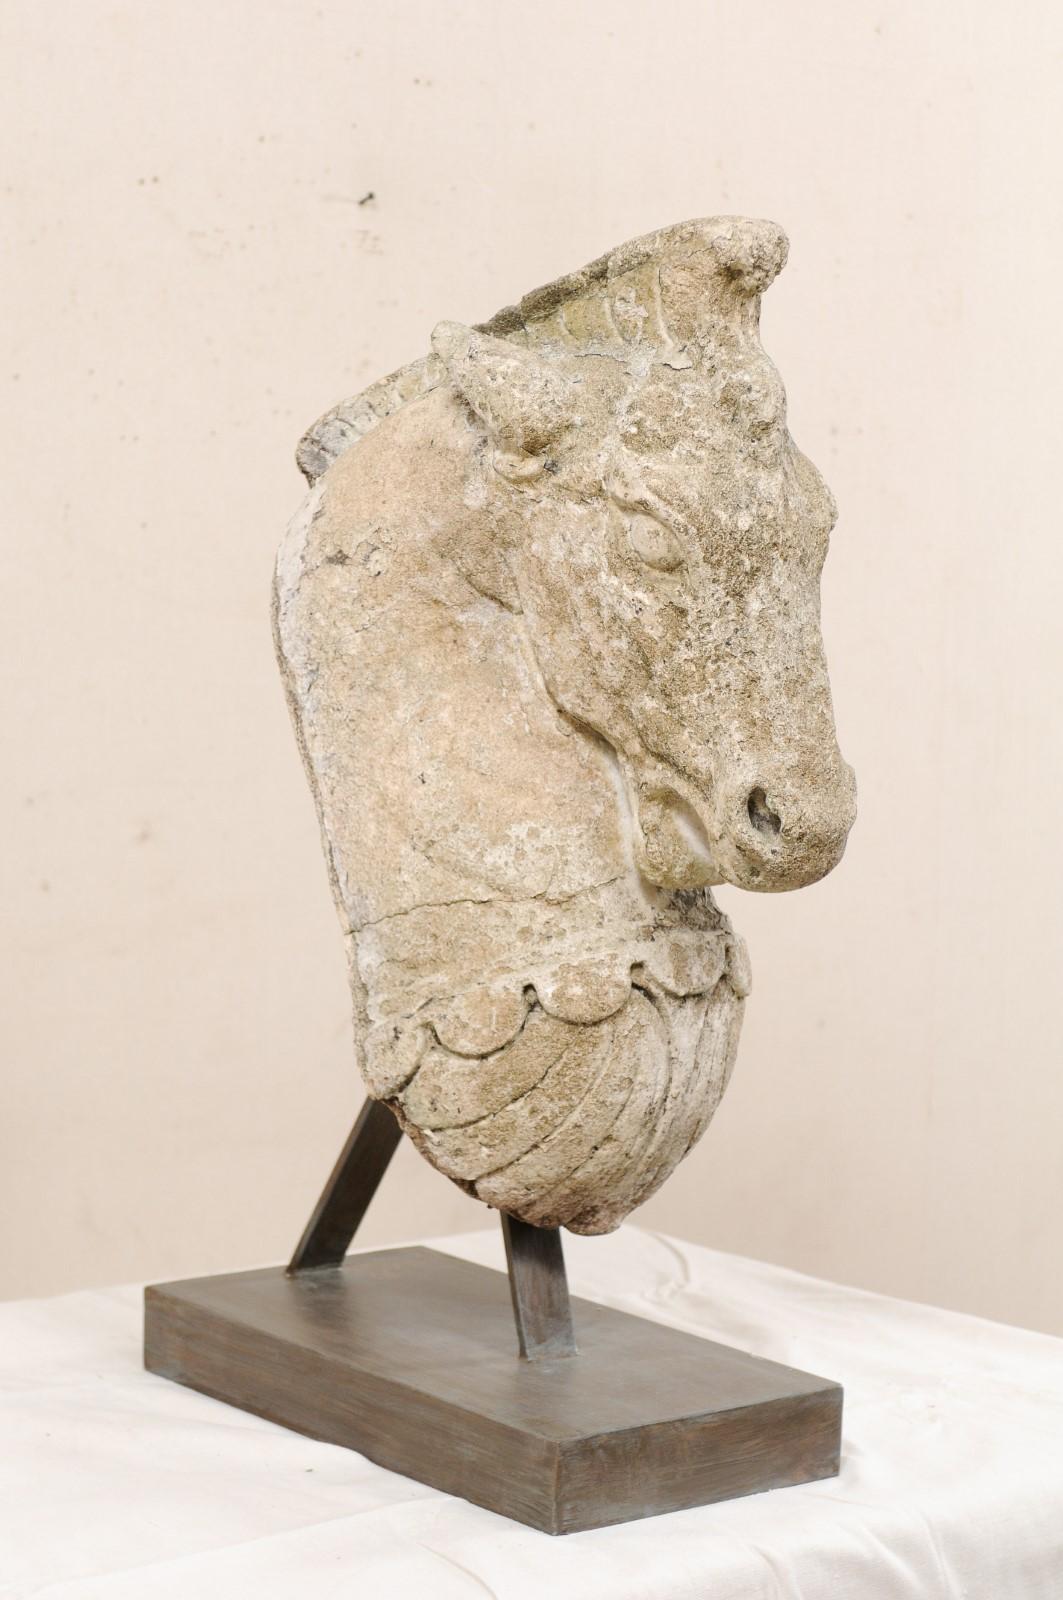 A 19th century European sculptural horse head of cast stone and mounted on custom stand. This fabulous art piece, standing just shy of 3 feet in height, has been custom fashioned from a 19th century cast-stone horse head, which was likely once a